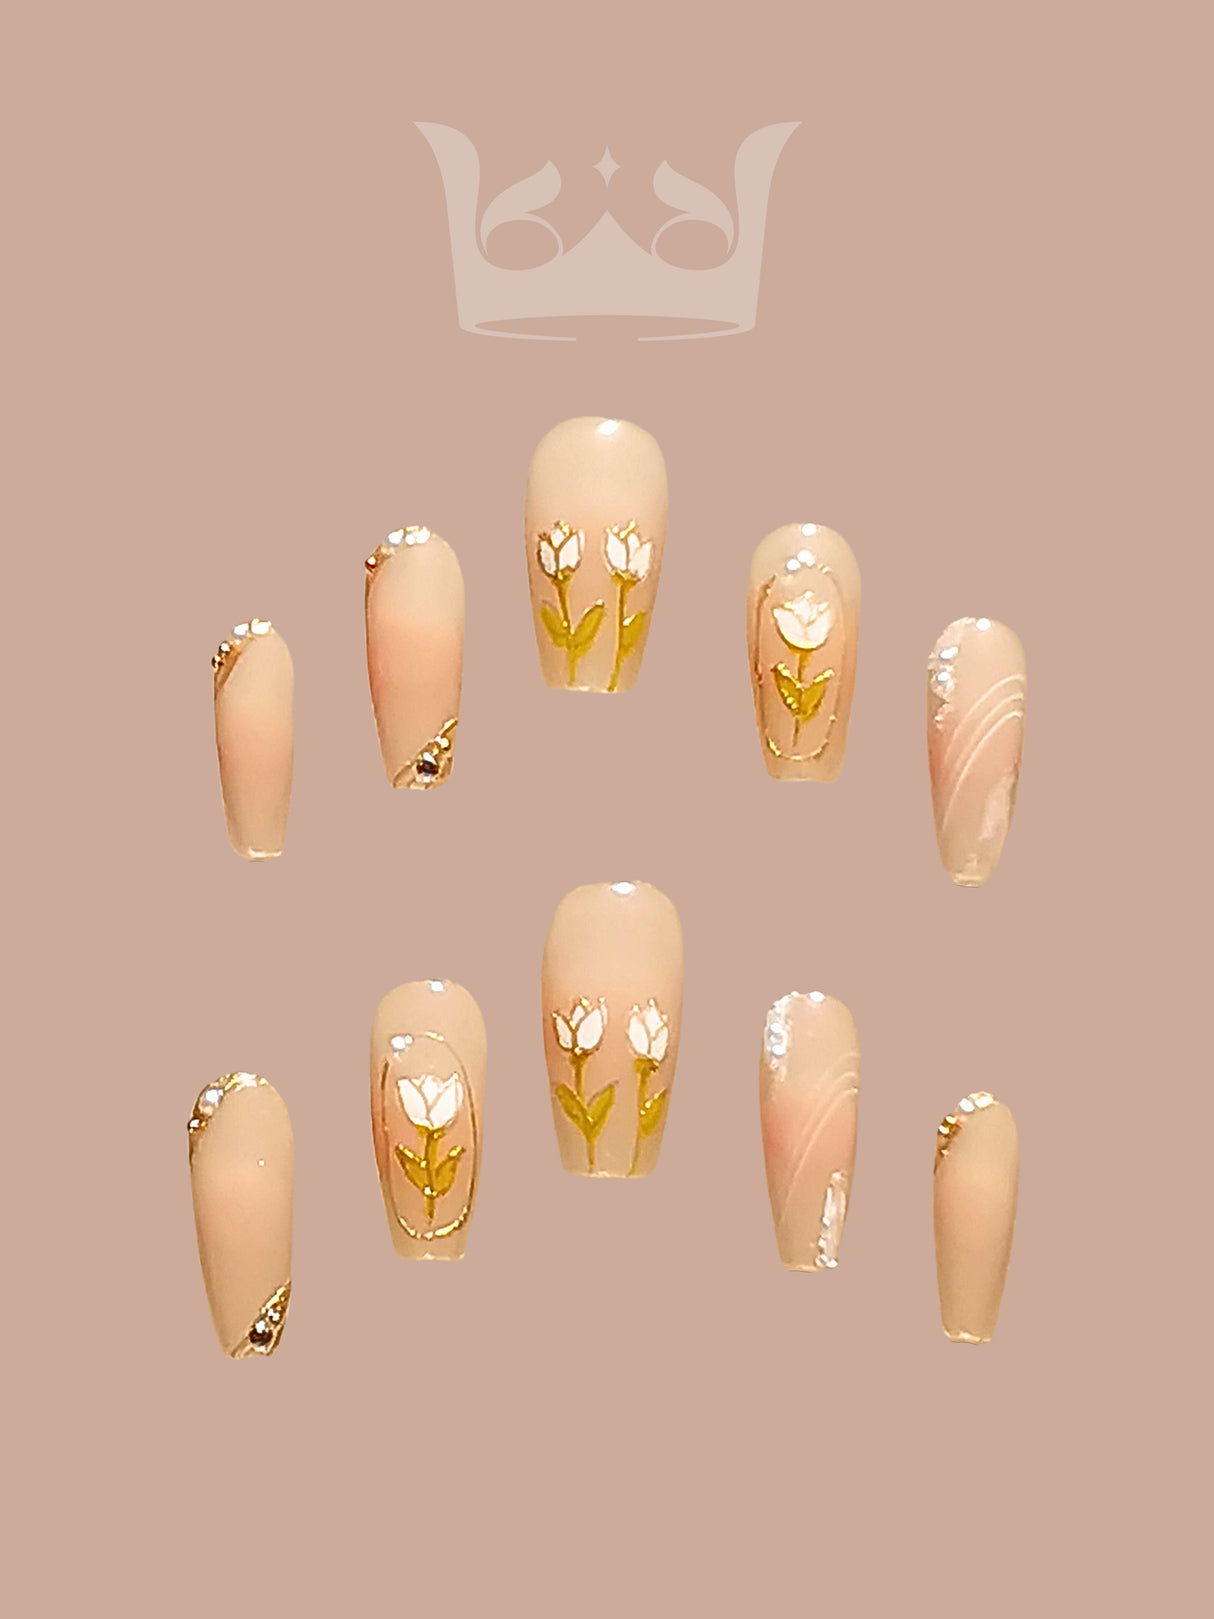 These press-on nails are perfect for special occasions, with a soft neutral base color, delicate floral art, gold accents, marbled effect, and glossy finish. 